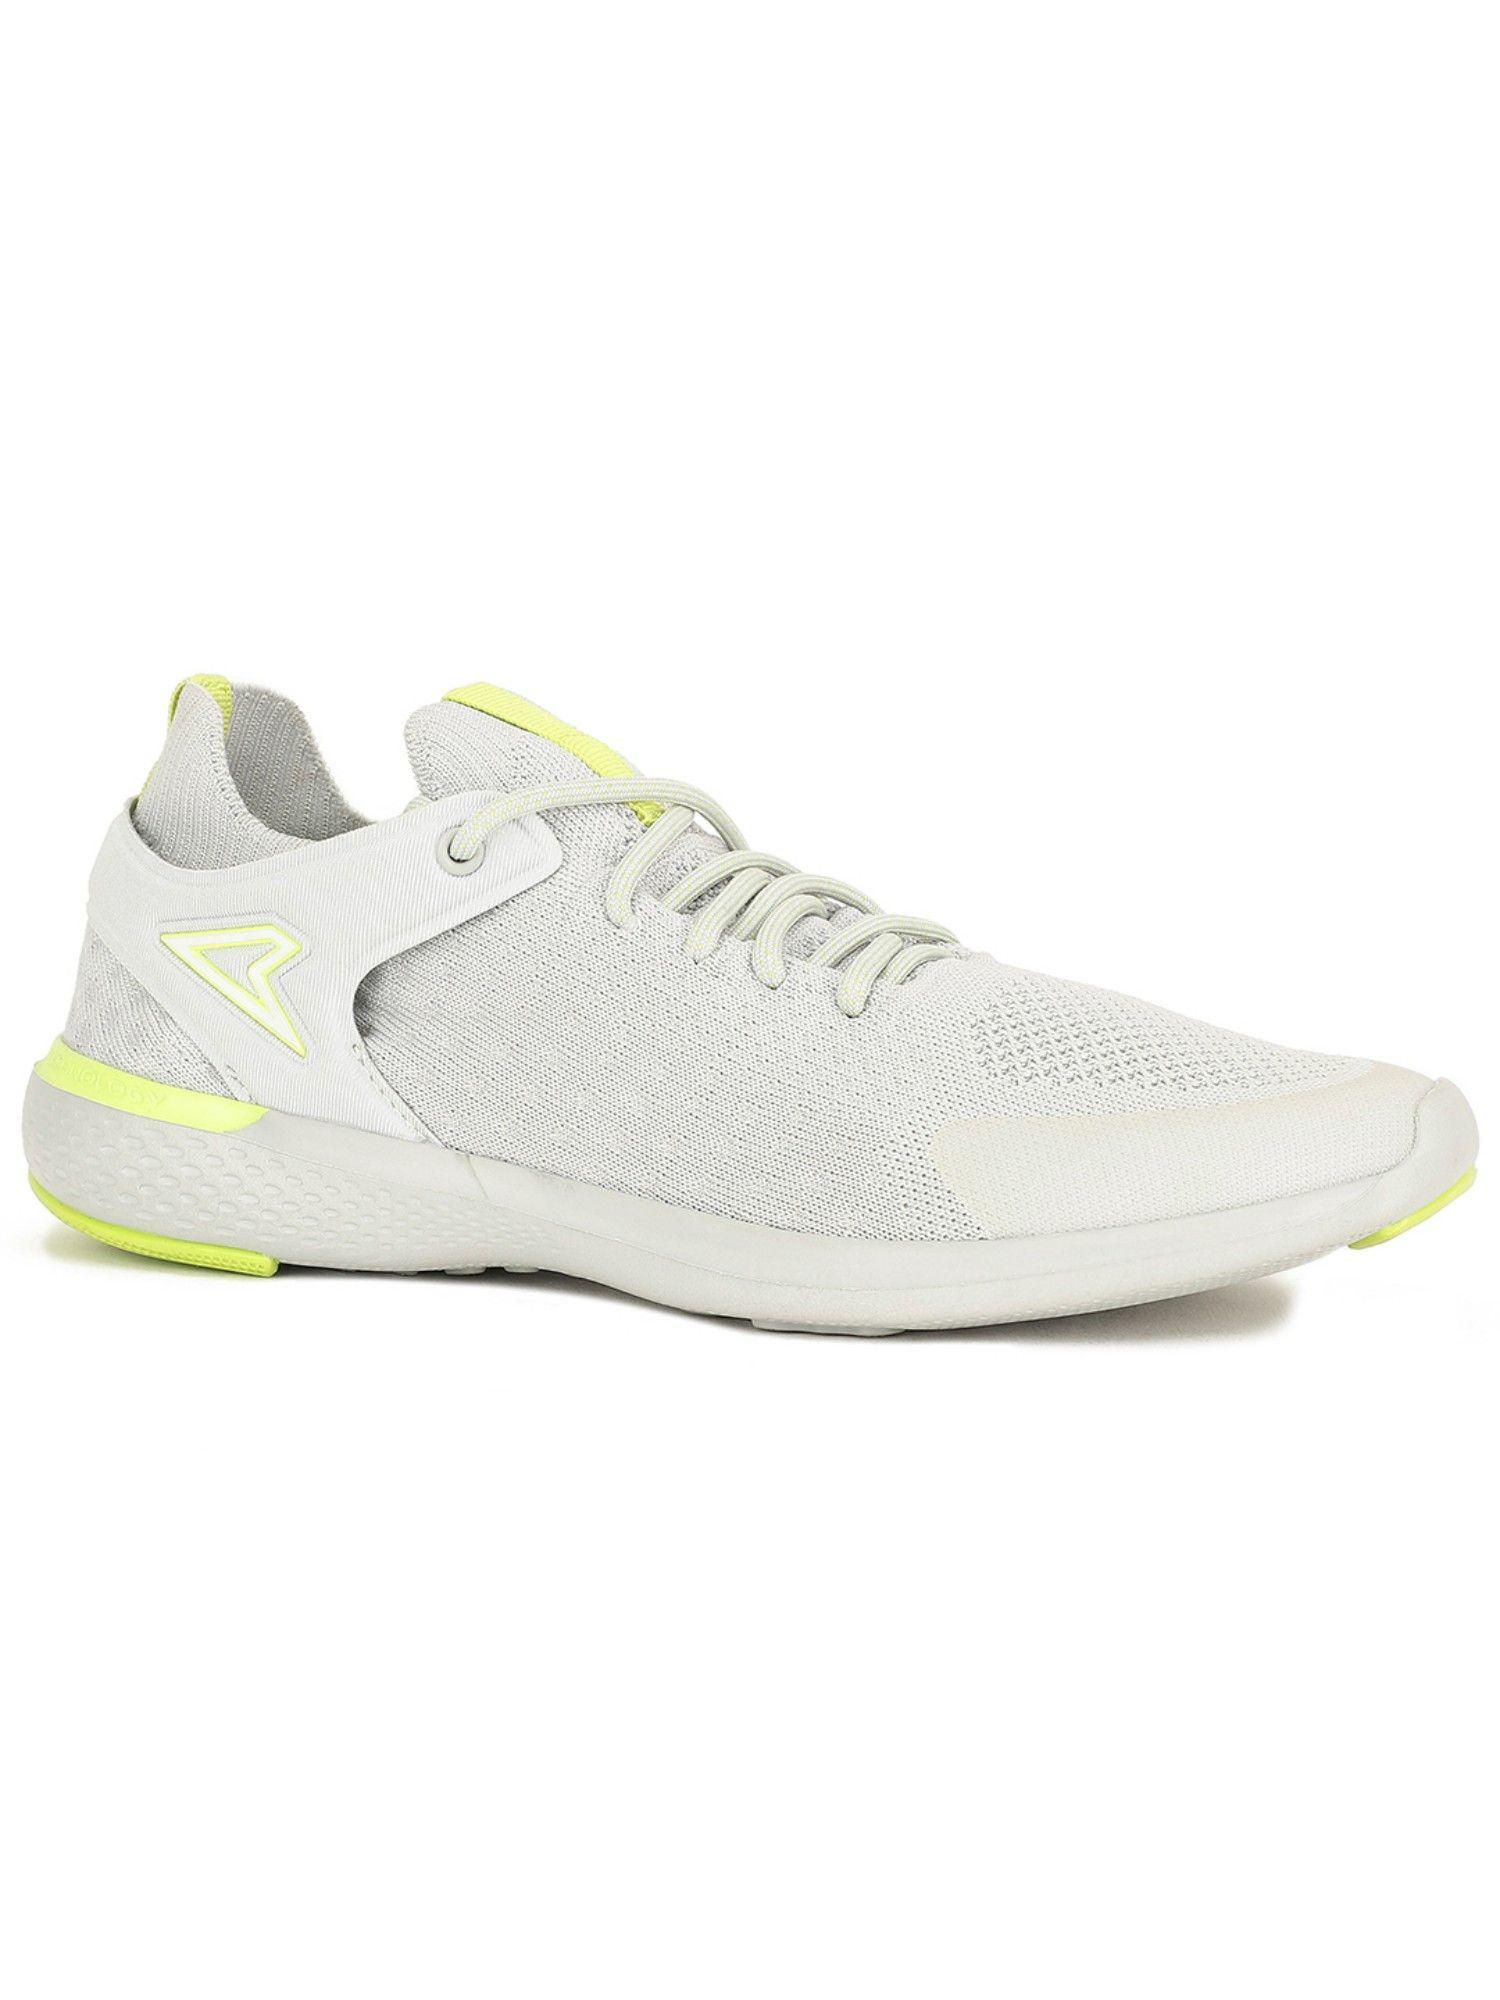 training & gym shoes for men (grey)